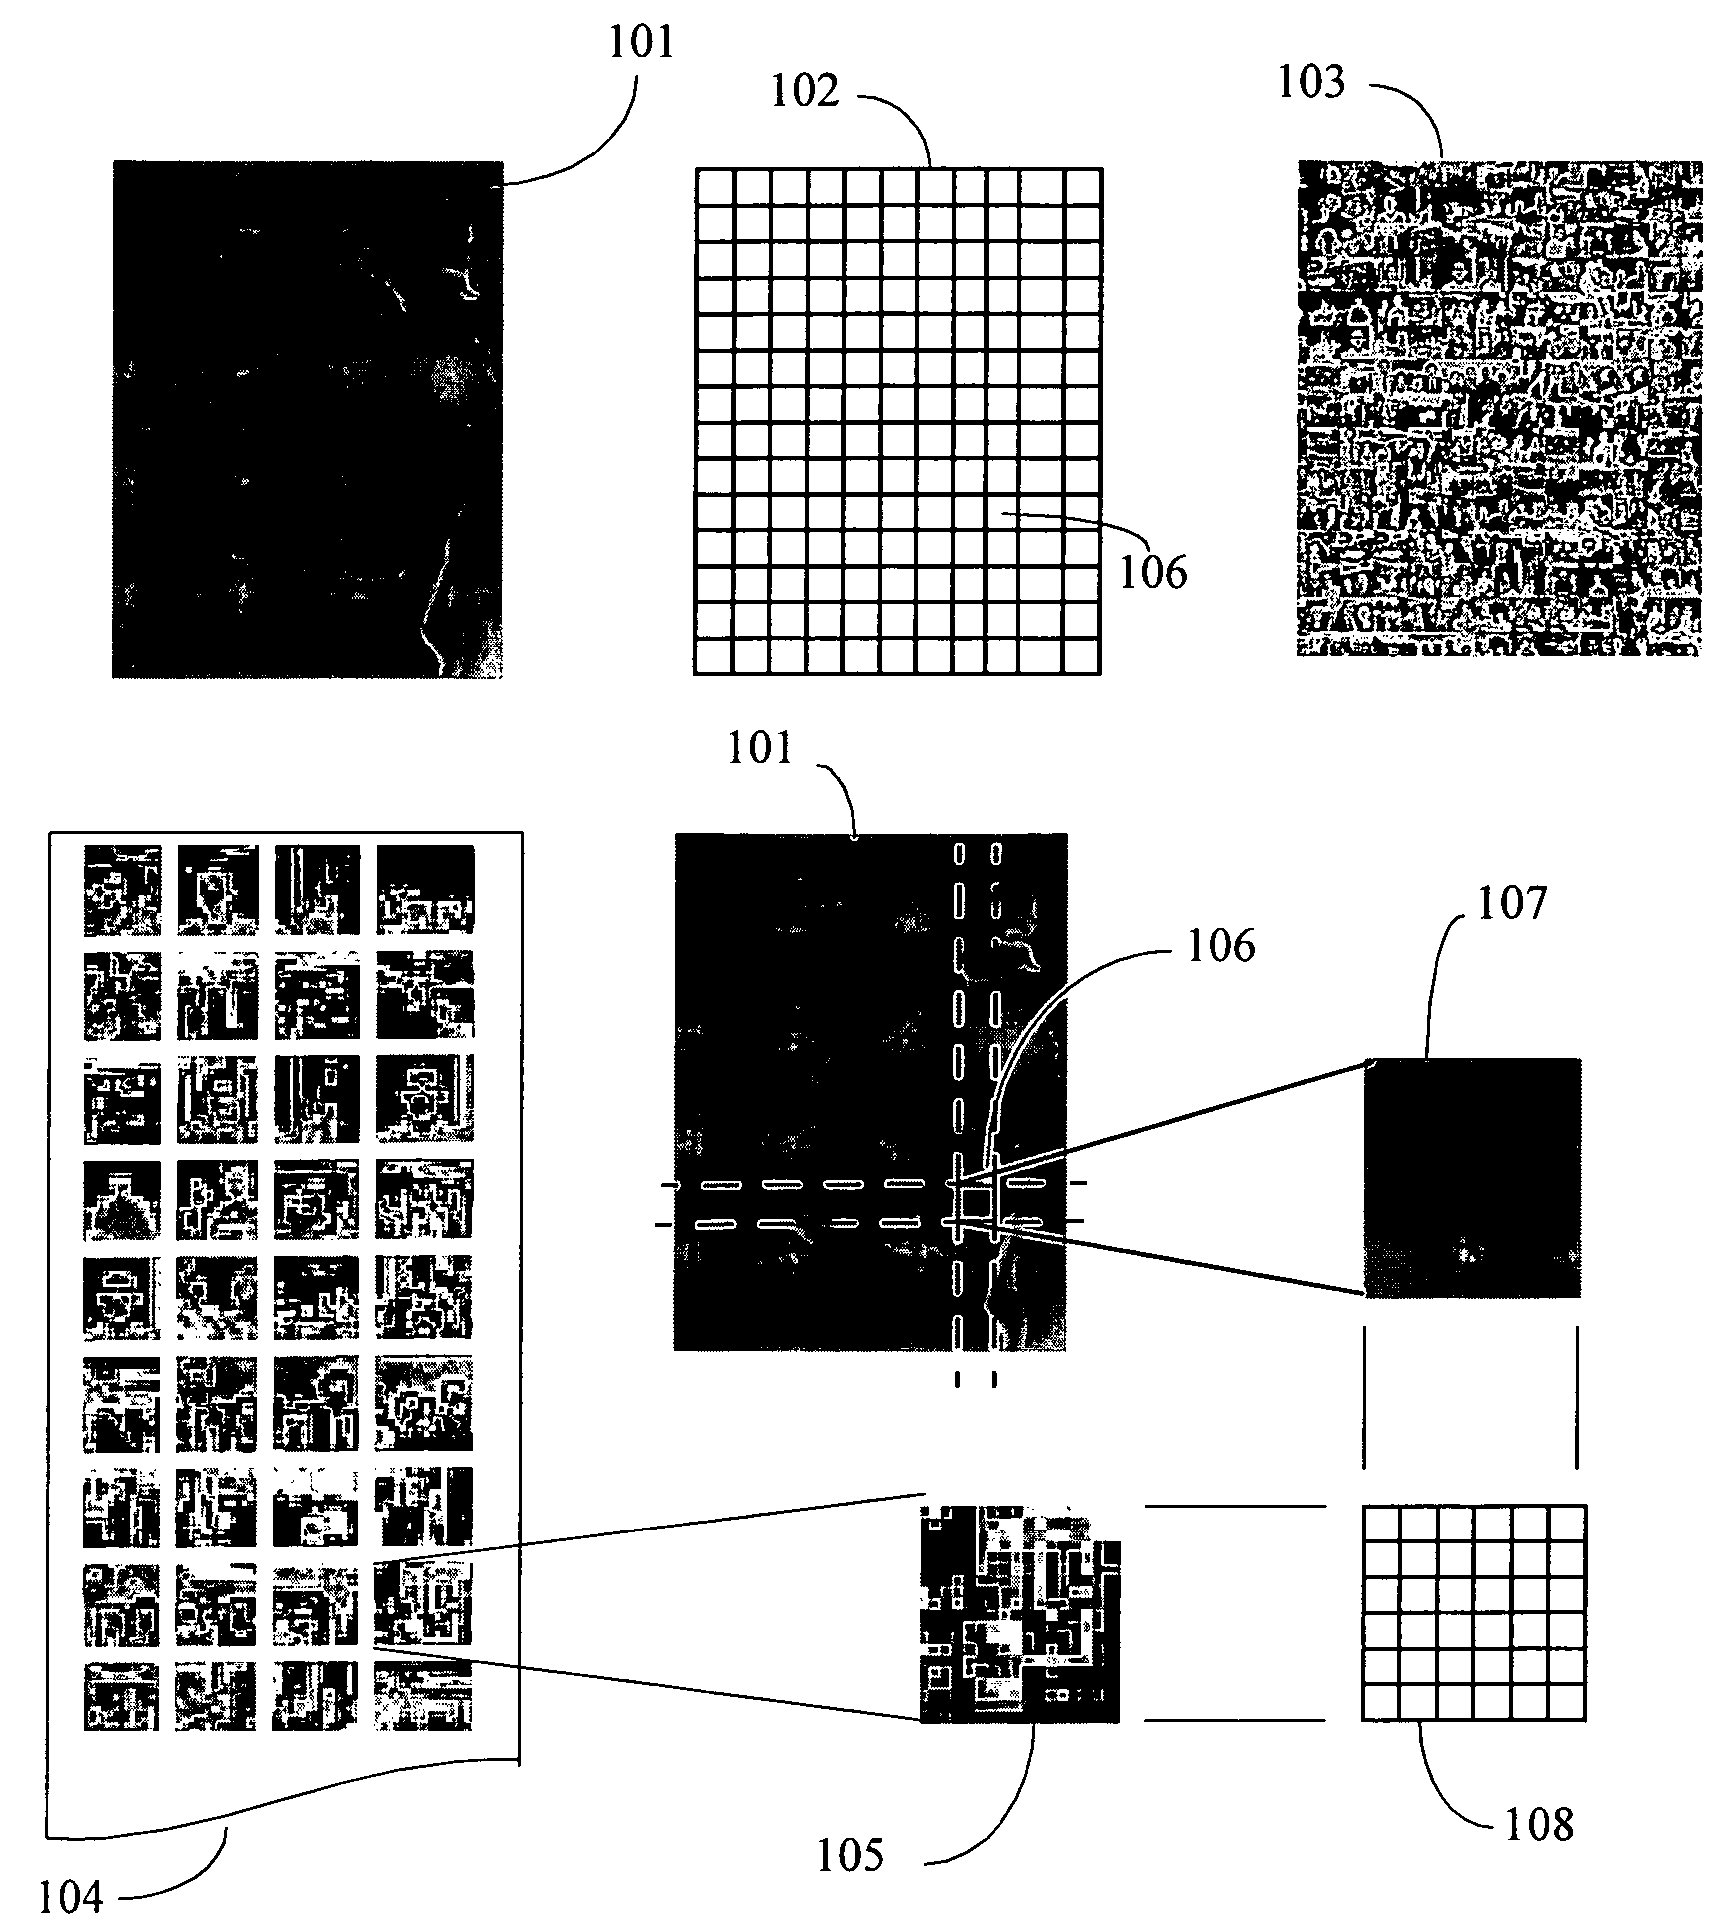 Digital composition of a mosaic image